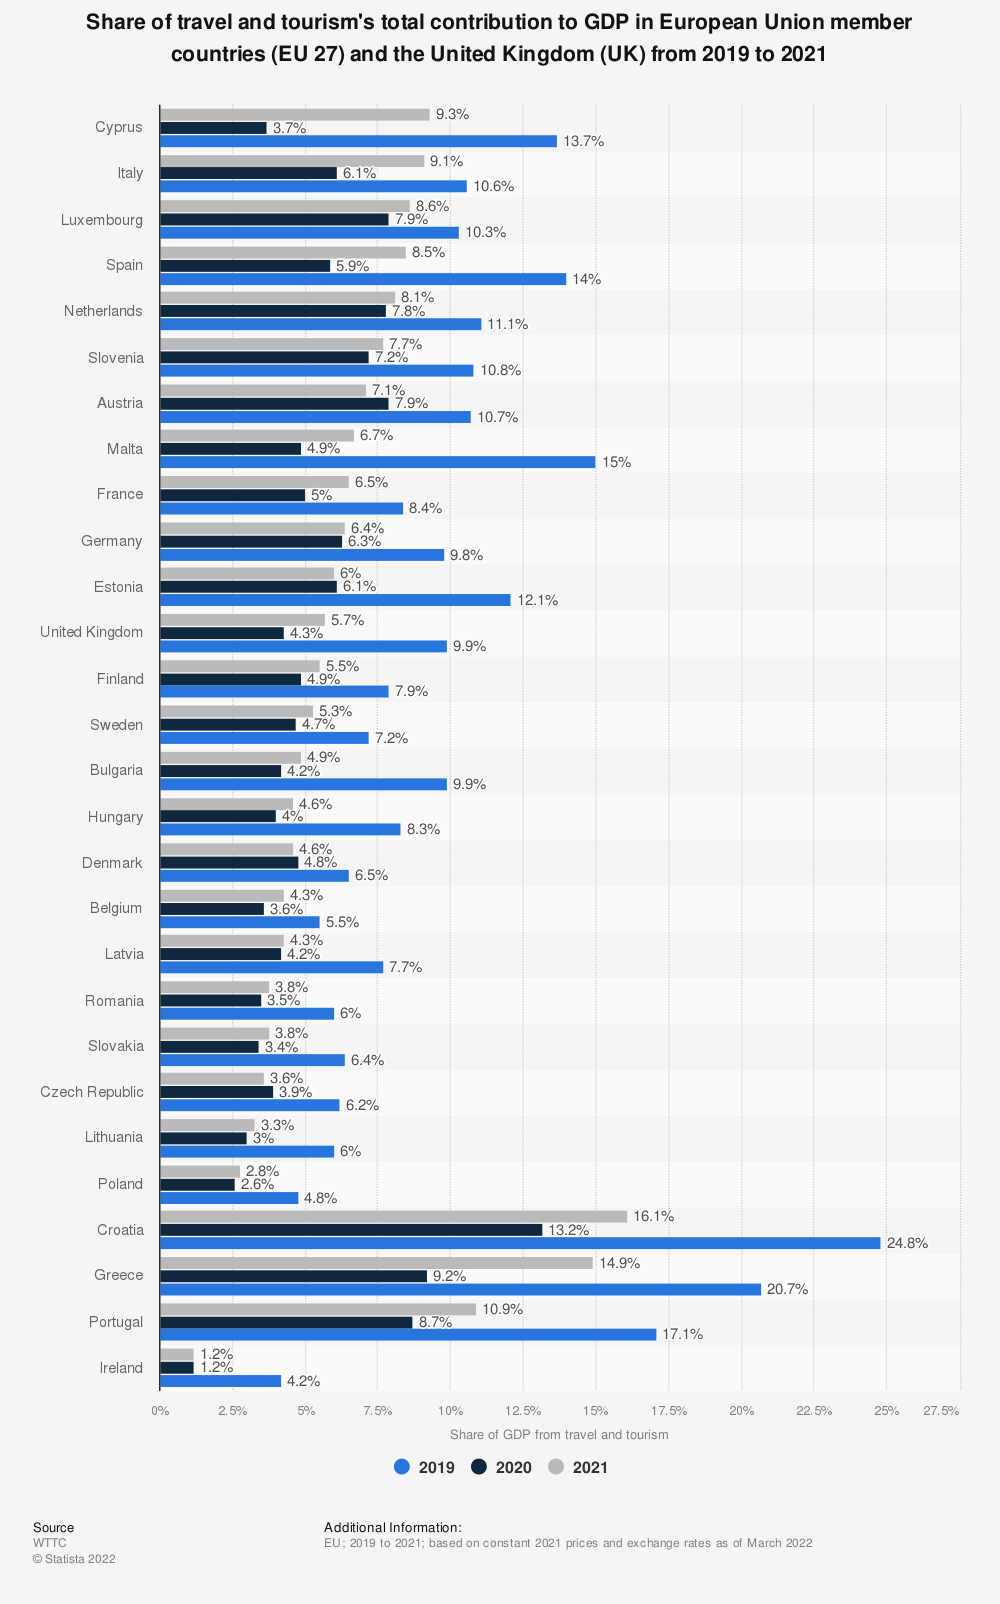 Statistic: Share of travel and tourism's total contribution to GDP in European Union member countries (EU 28) in 2019 and 2020 | Statista